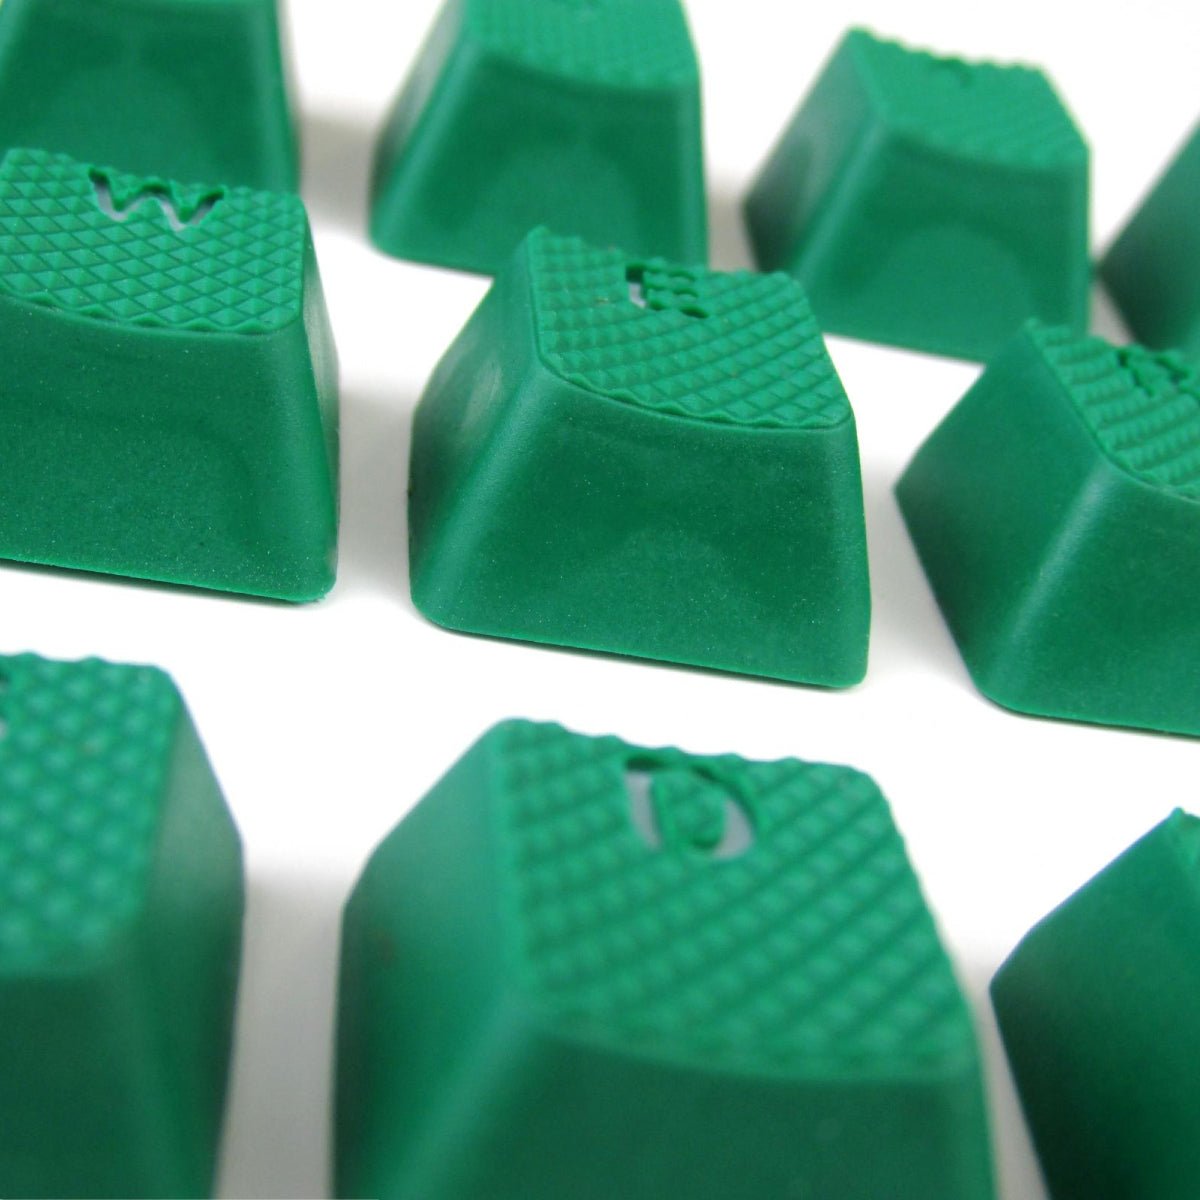 Tai-Hao 18 Key ABS Rubber Keycaps - Green - Store 974 | ستور ٩٧٤